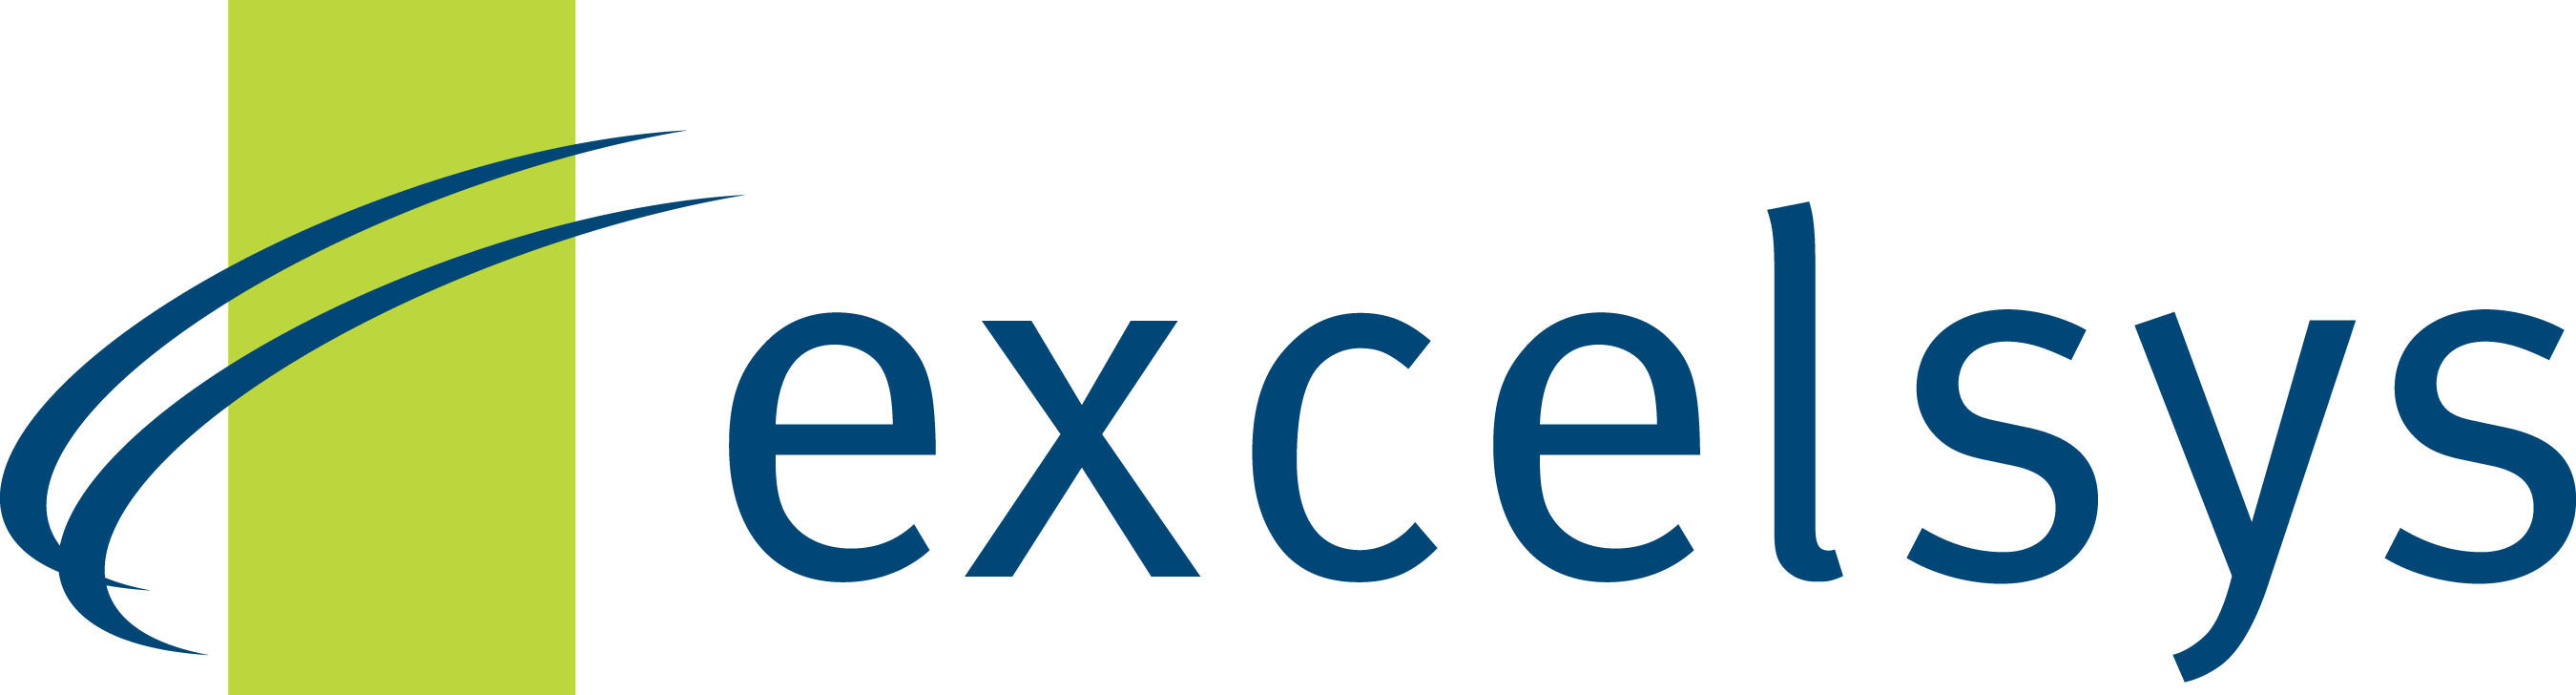 Excelsys Technologies.